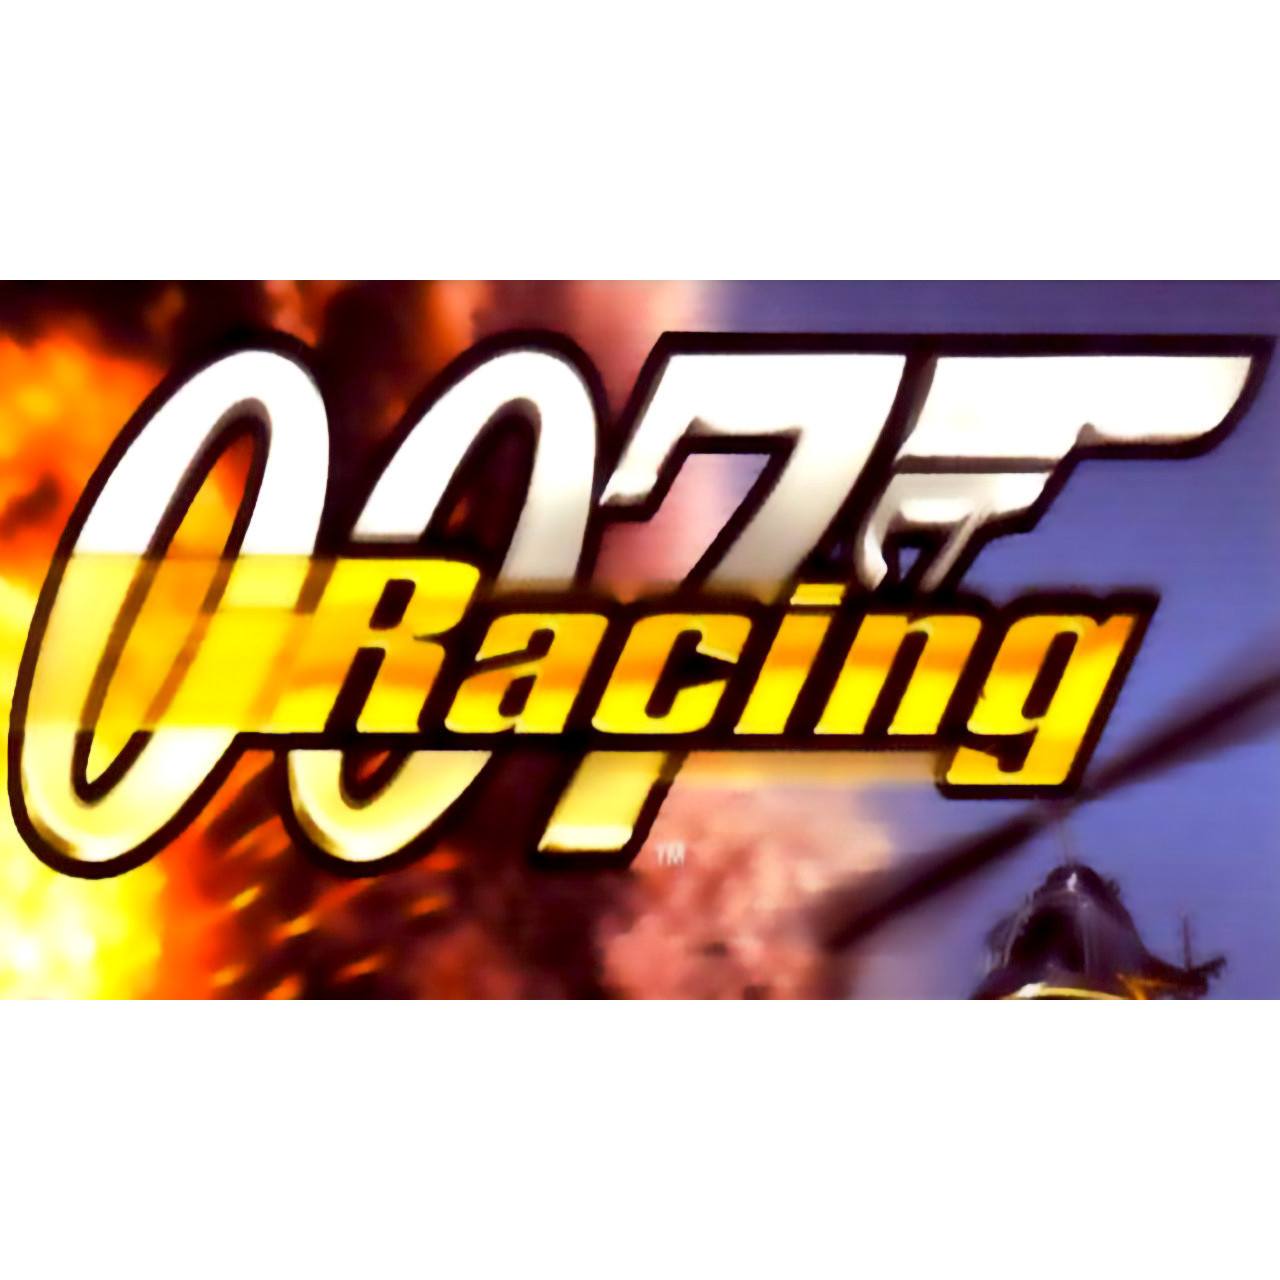 007 Racing Sony PlayStation Game